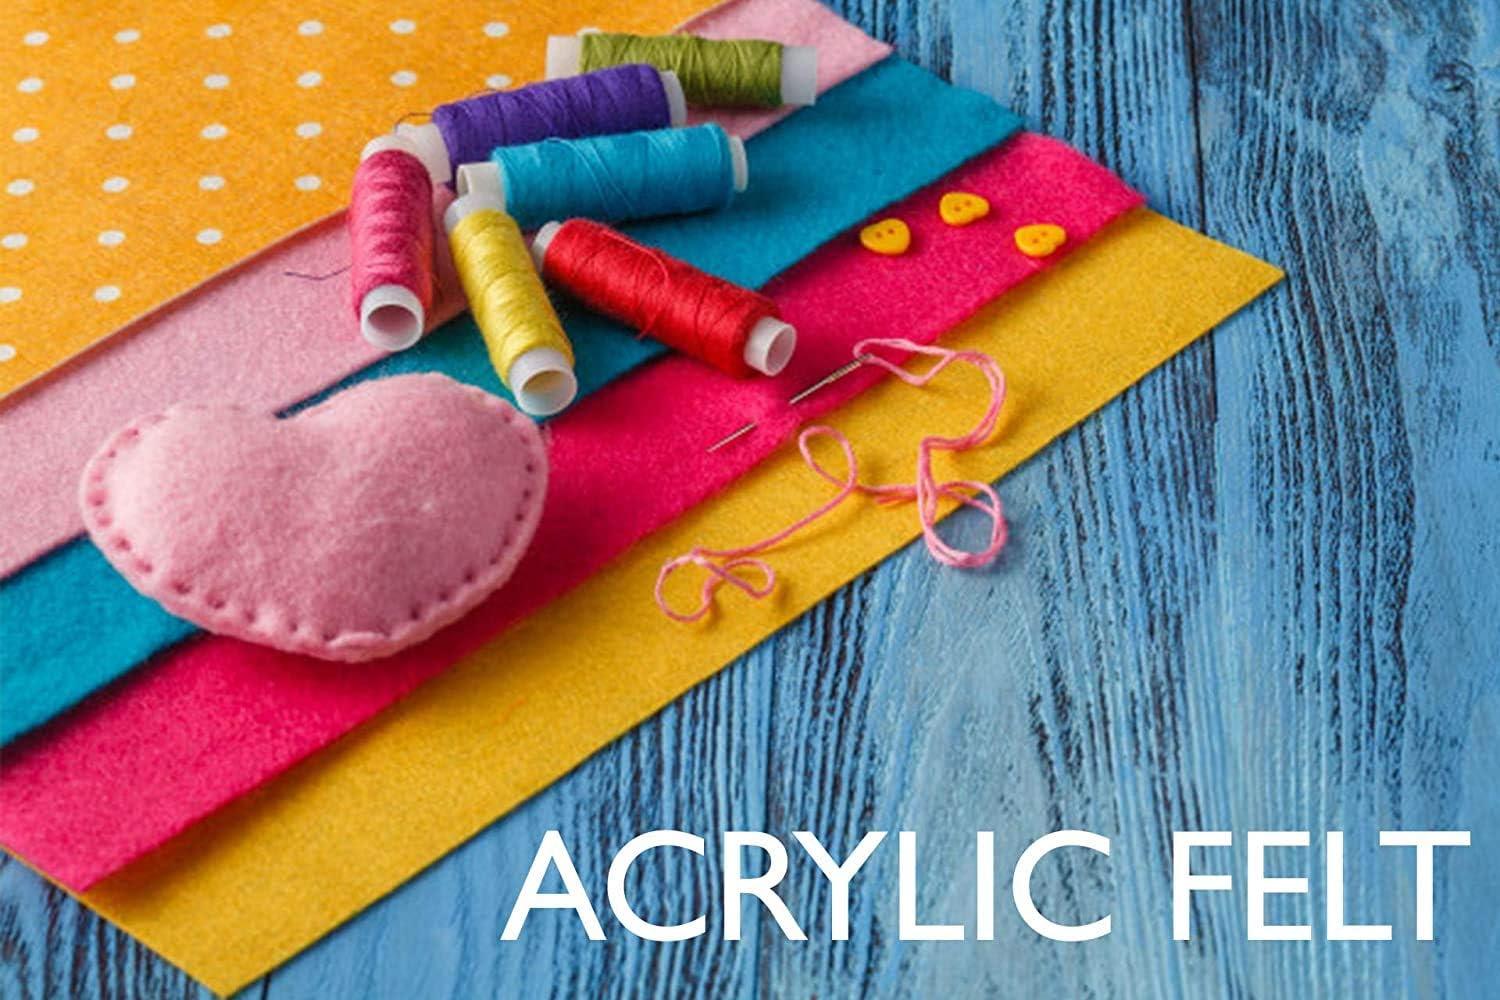 FabricLA Acrylic Felt Fabric - 72 inch Wide 1.6mm Thick Felt by The Yard - Use Soft Felt Sheets for Sewing, Cushion, and Padding, DIY Arts & Crafts